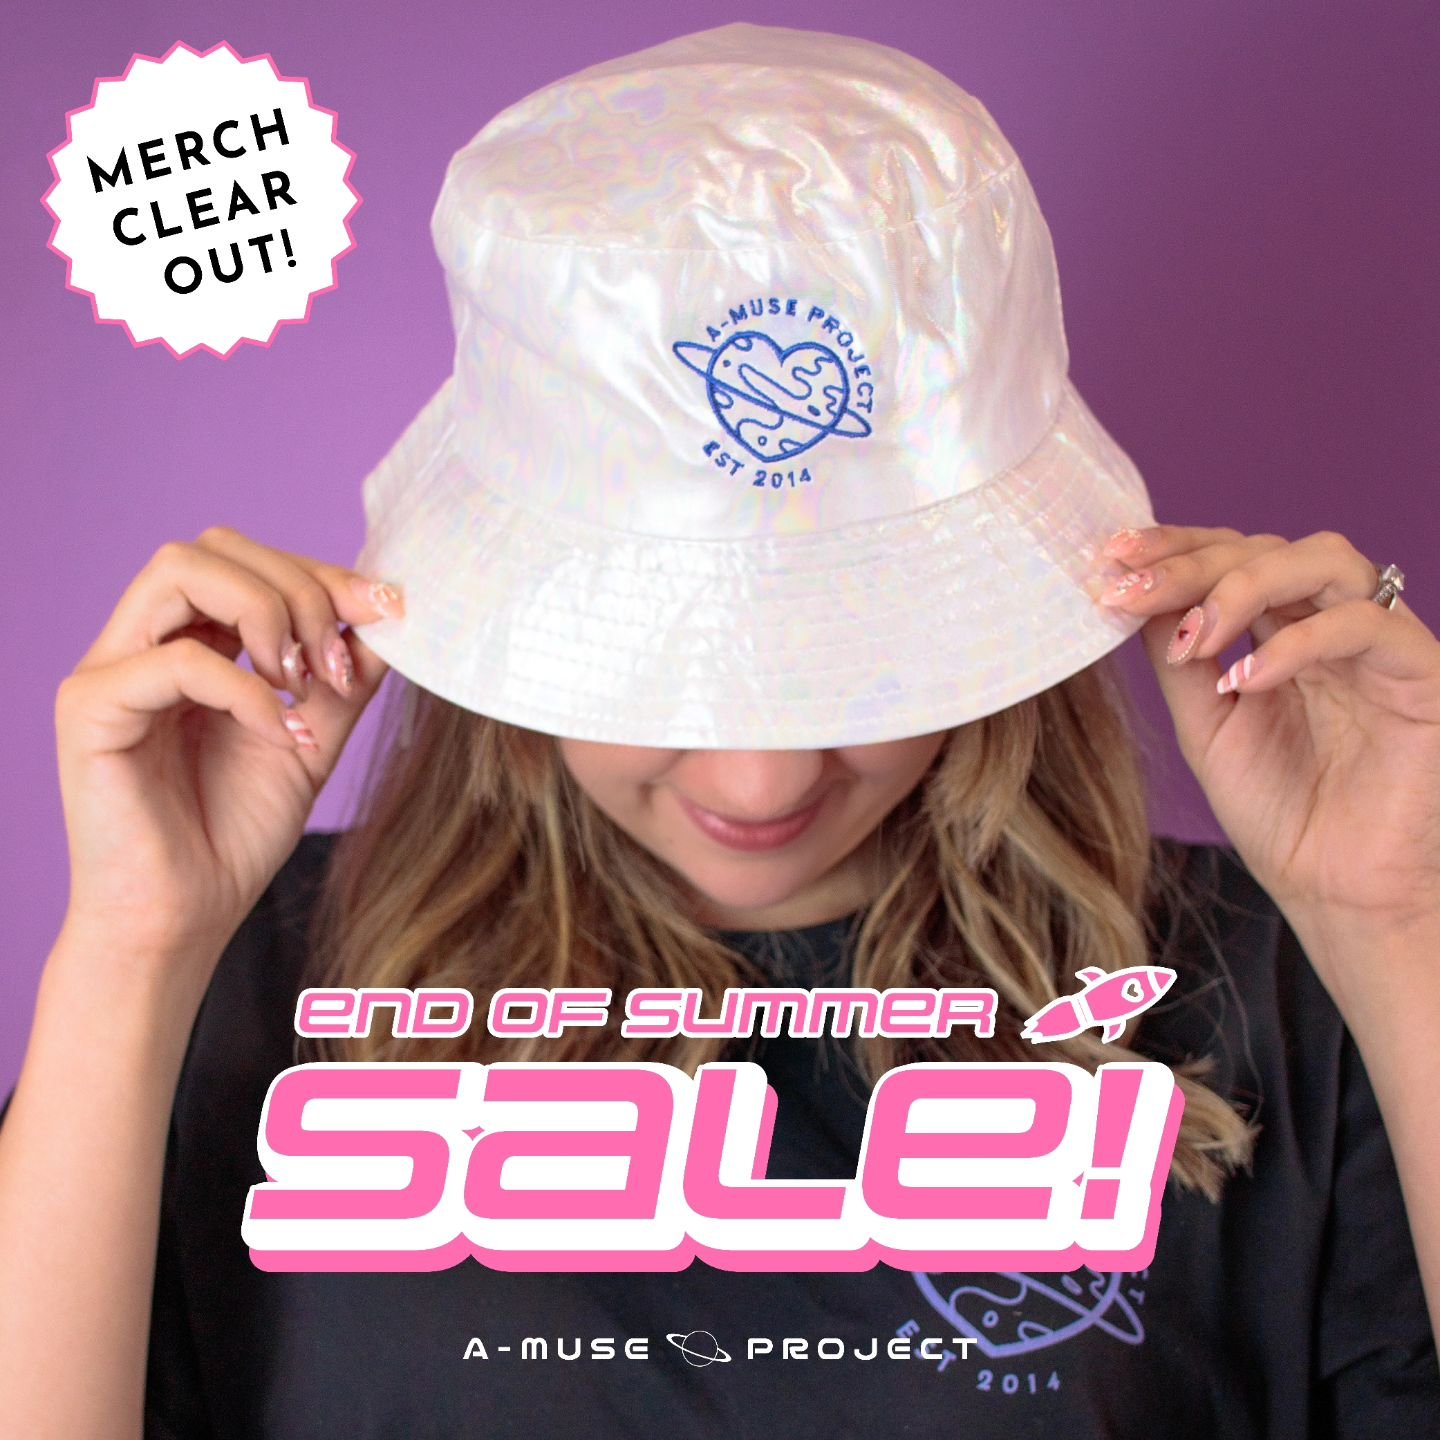 SALE ALERT 🚨 We have a new wave of merchandise coming in very soon, and to celebrate, we are throwing an insane End of Summer Sale ⛱️☀️ 

Everything from hats to towels must go so make sure to check out our online store - this will be the last chanc